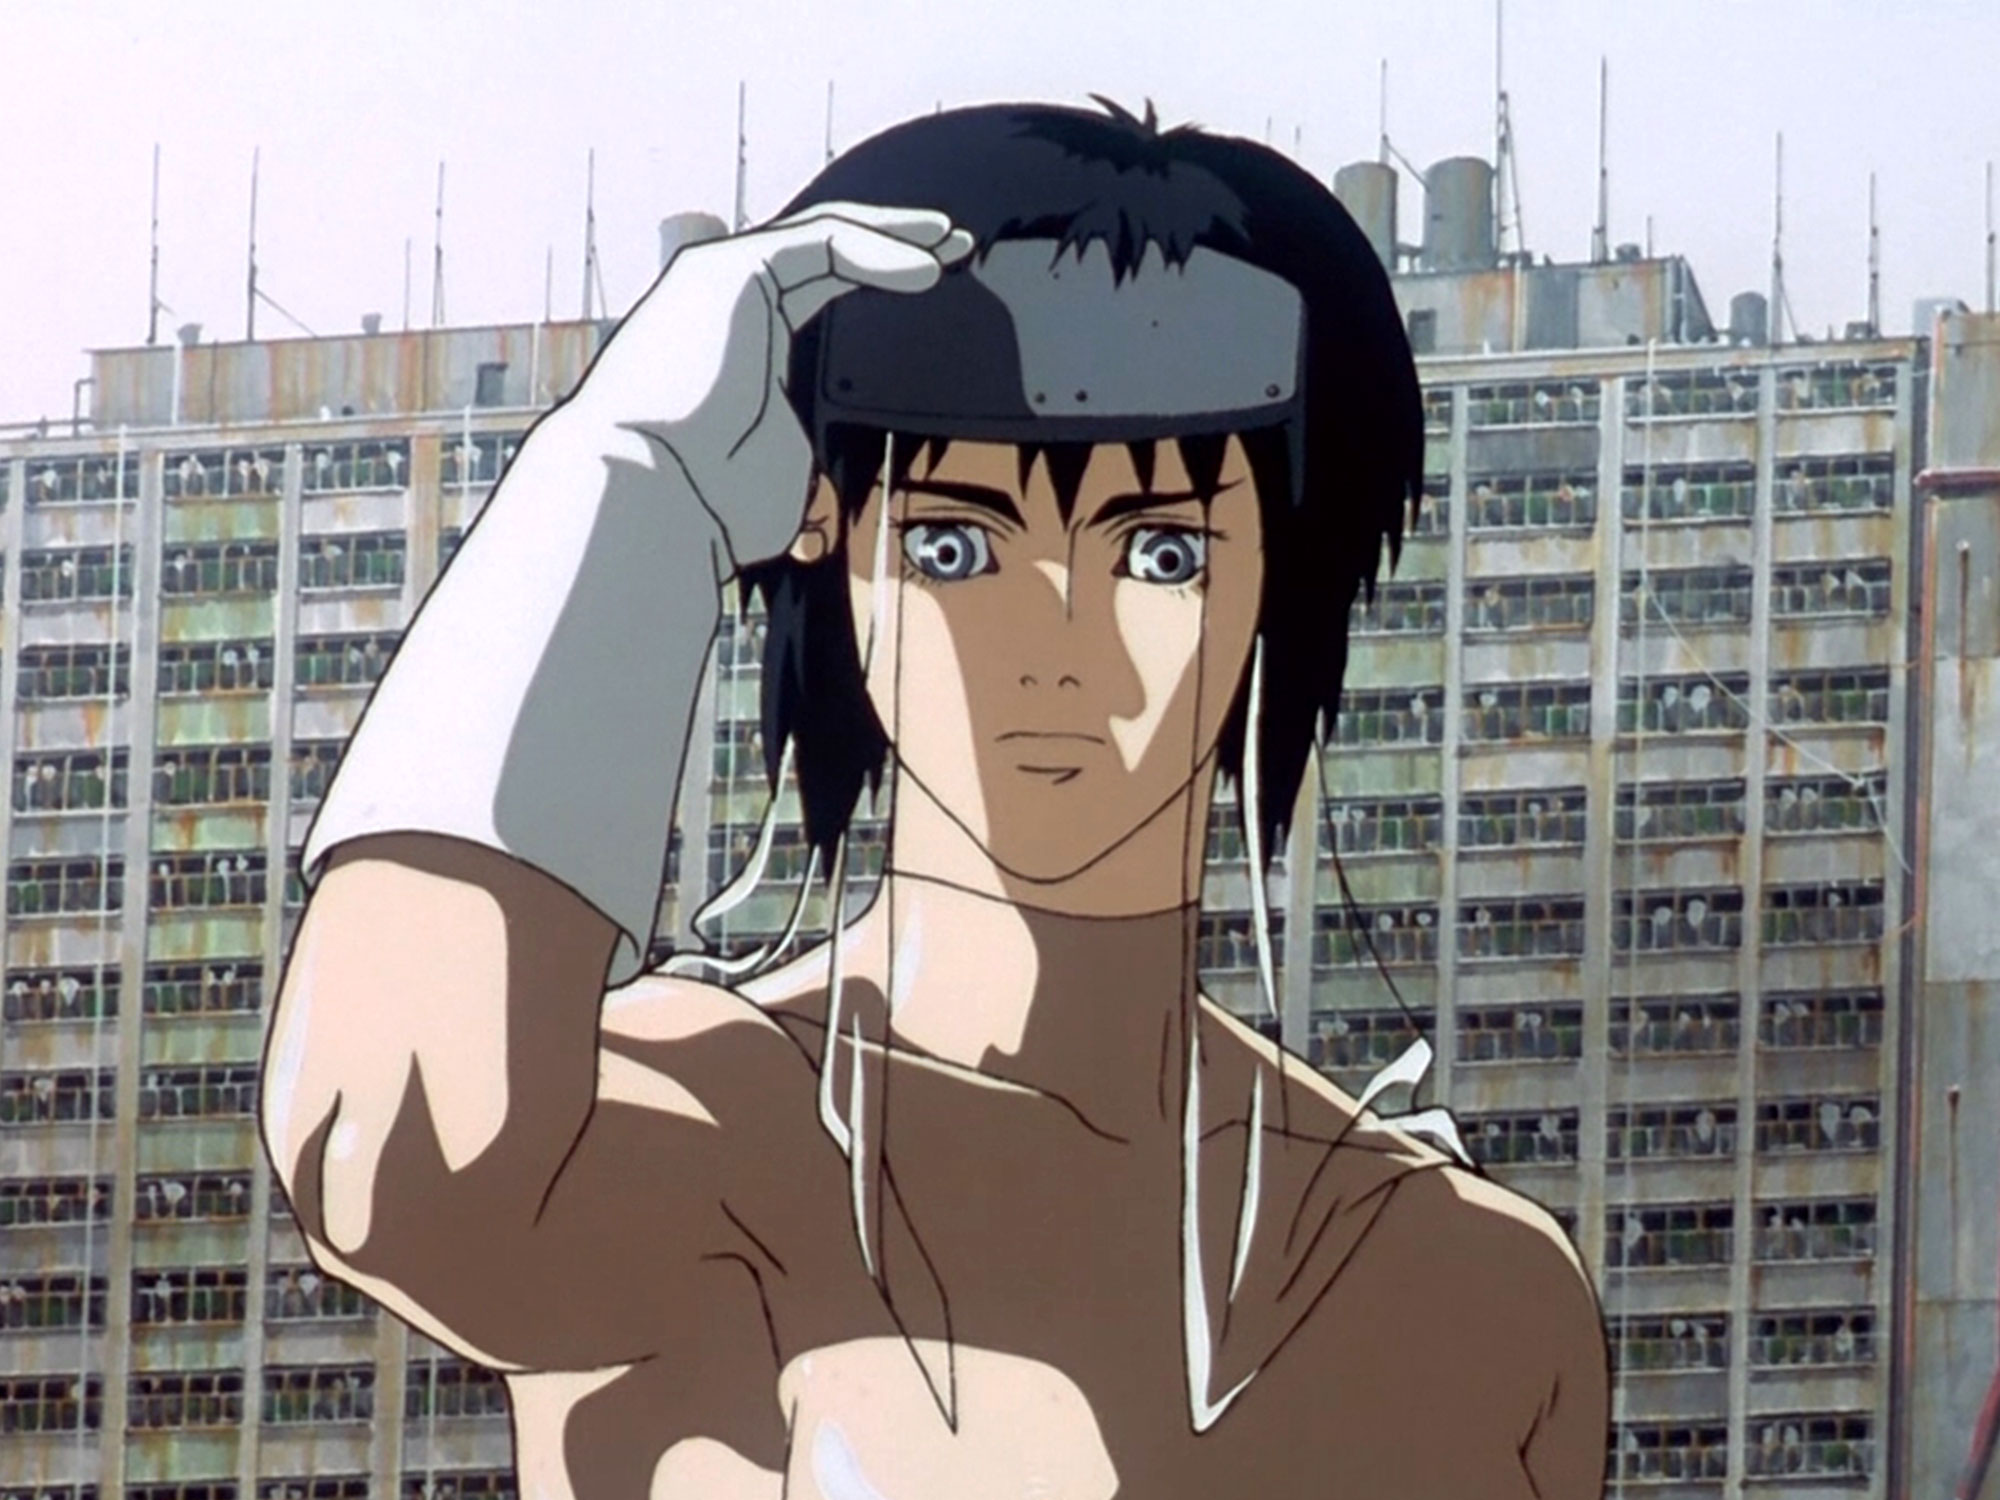 ghost in the shell 1995 doblaje